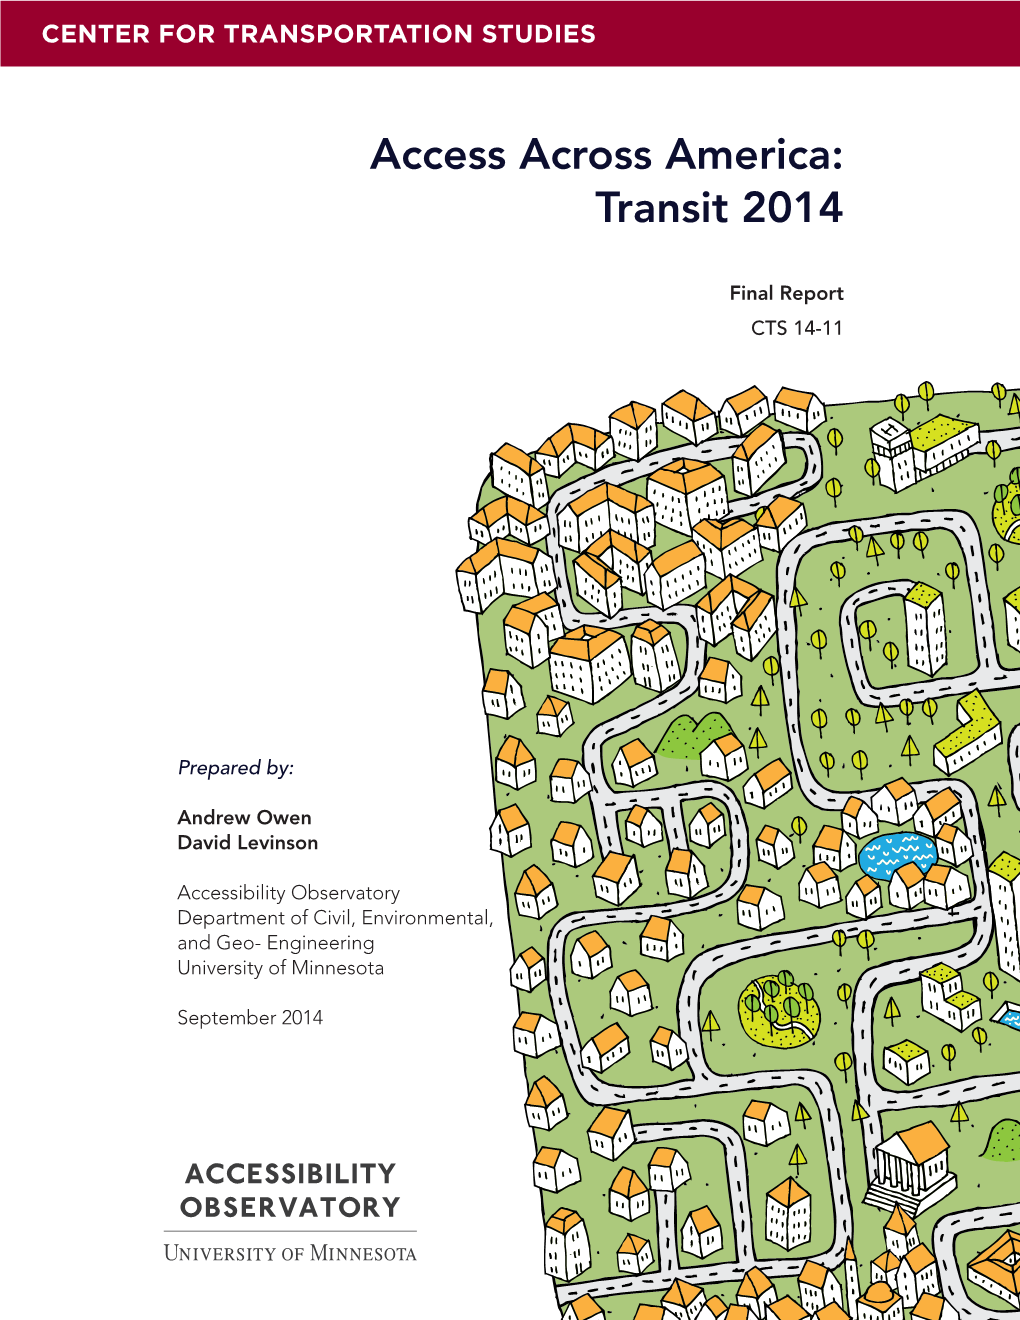 Access Across America: Transit 2014 Methodology, Describes the Data and Methodology Used in This Evaluation